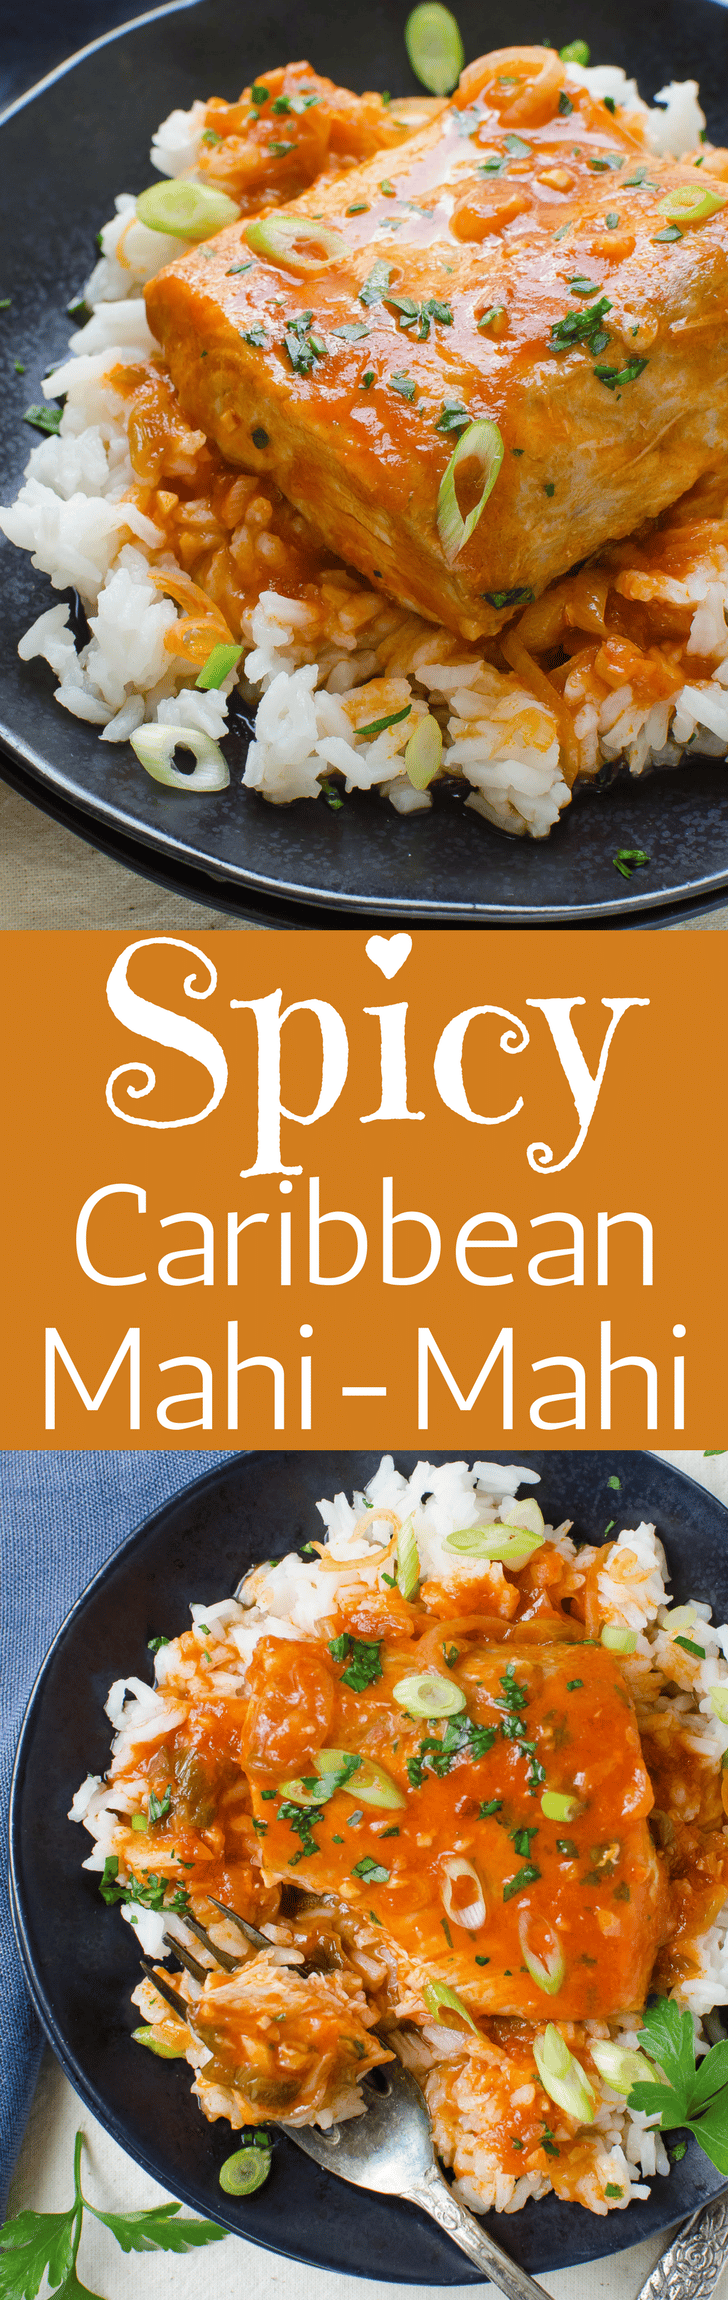 If you're skittish about cooking fish try this easy poached fish recipe. Spicy Caribbean Mahi Mahi is fresh fillets simmered in a spicy island-style tomato broth. This easy fish dinner is delicious over steamed rice. #mahimahi #fish #fishrecipes #fishdinner #poachedfish #caribbeanfish #dolphin #seafoodrecipes #poachedseafood #mahimahirecipe